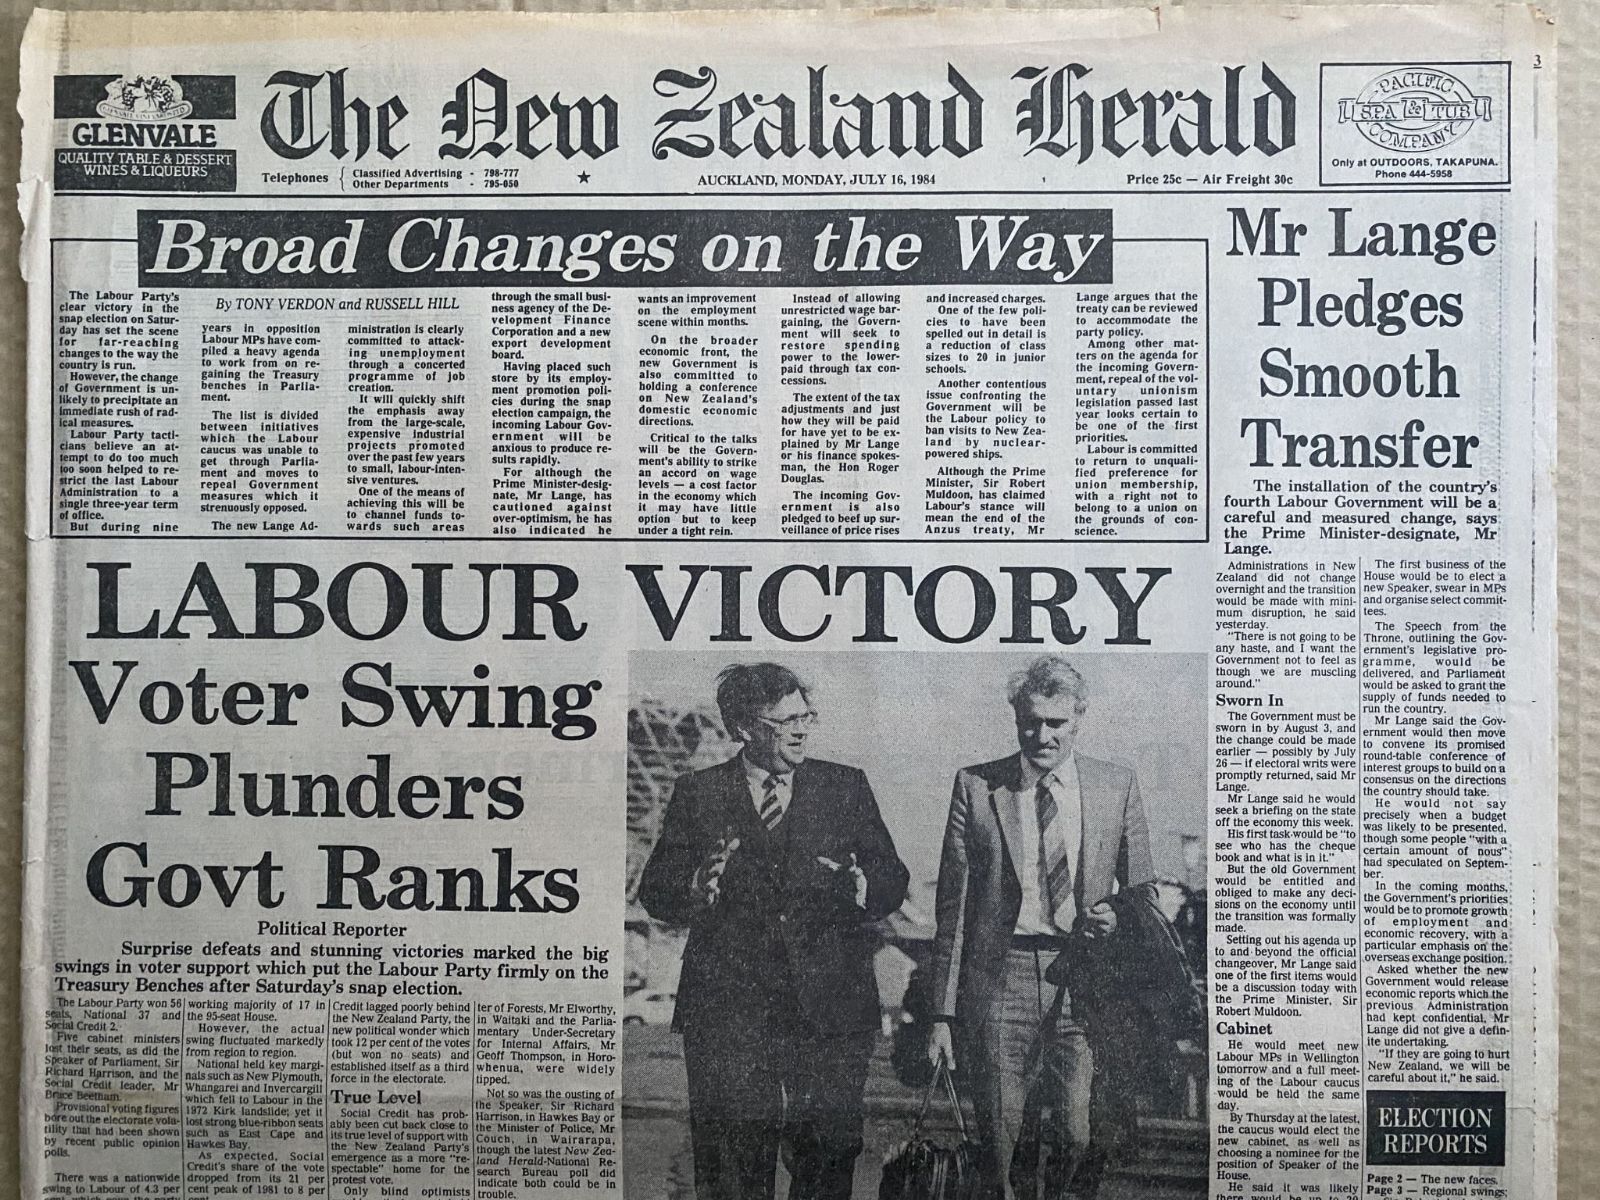 OLD NEWSPAPER: The New Zealand Herald, 16 July 1984 - Labour election victory